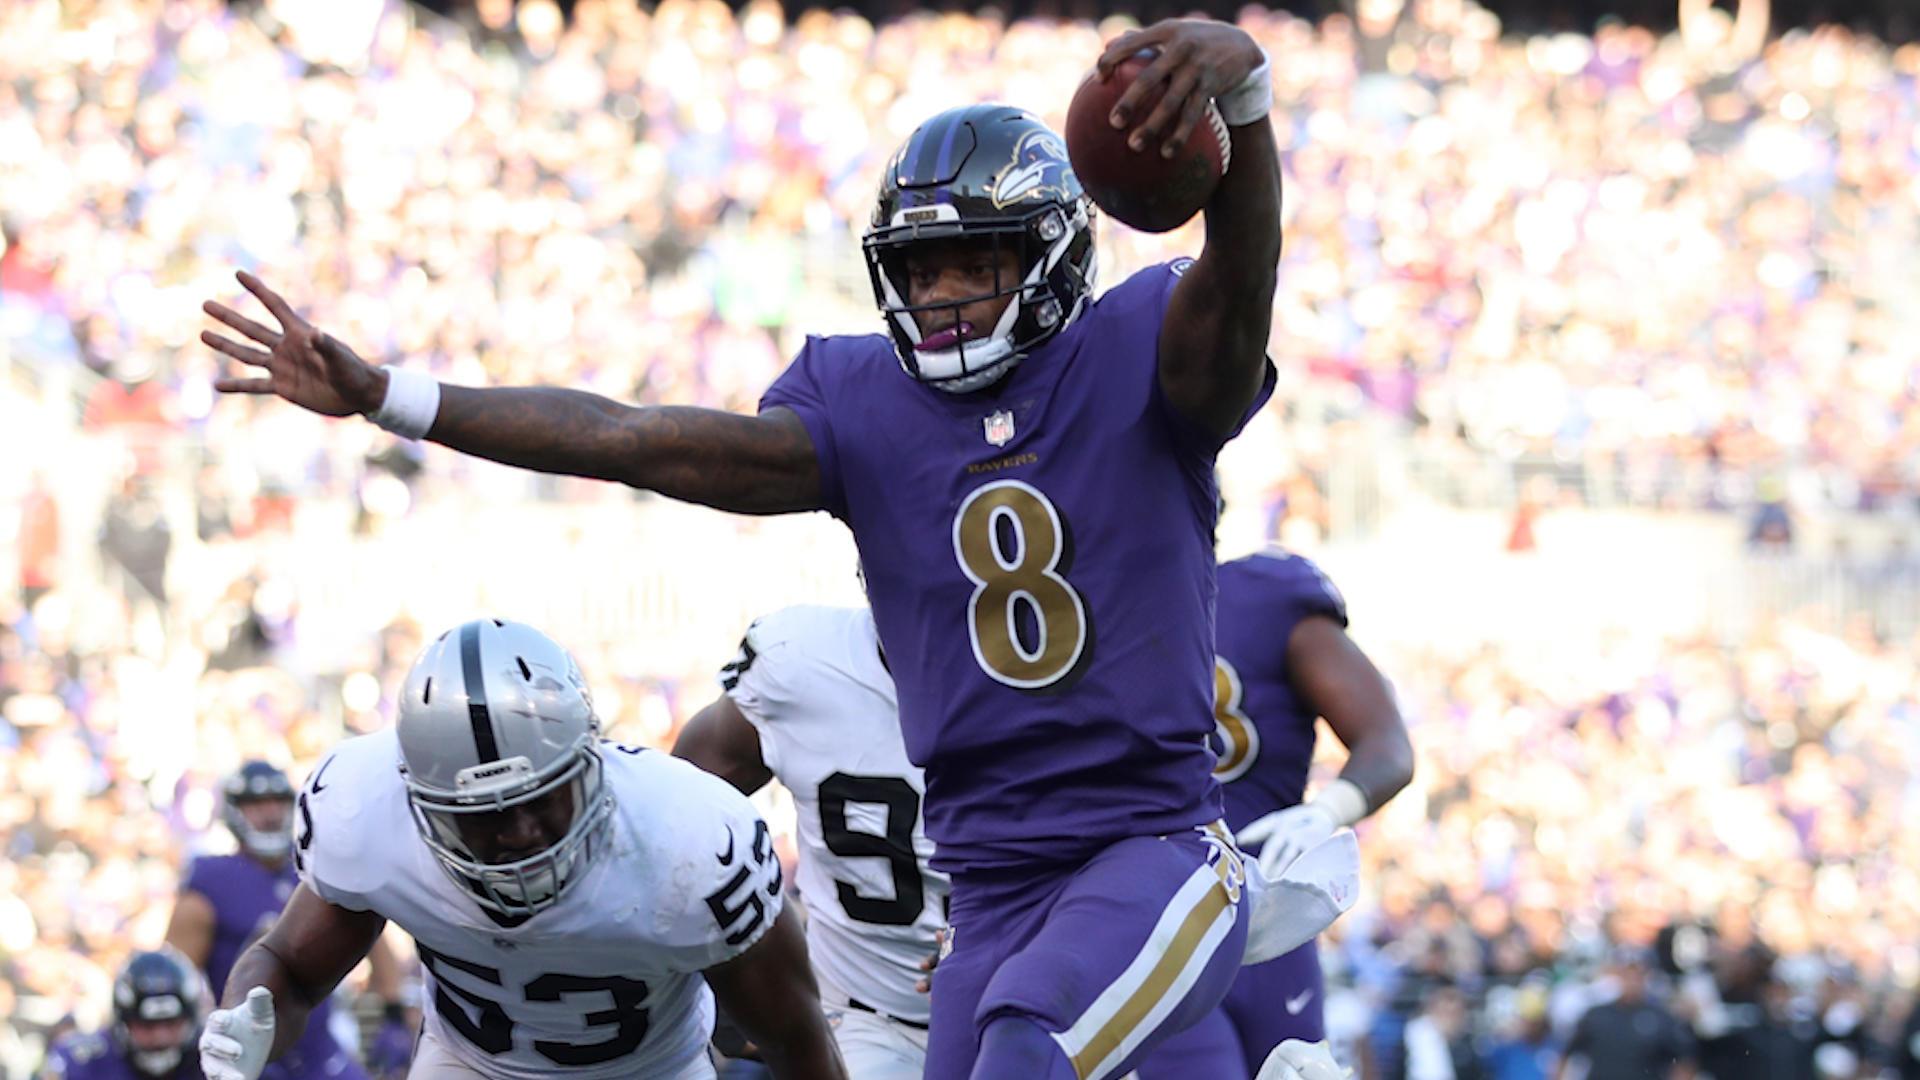 Off the Bench: Lamar Jackson makes second start for Ravens, what happens next?